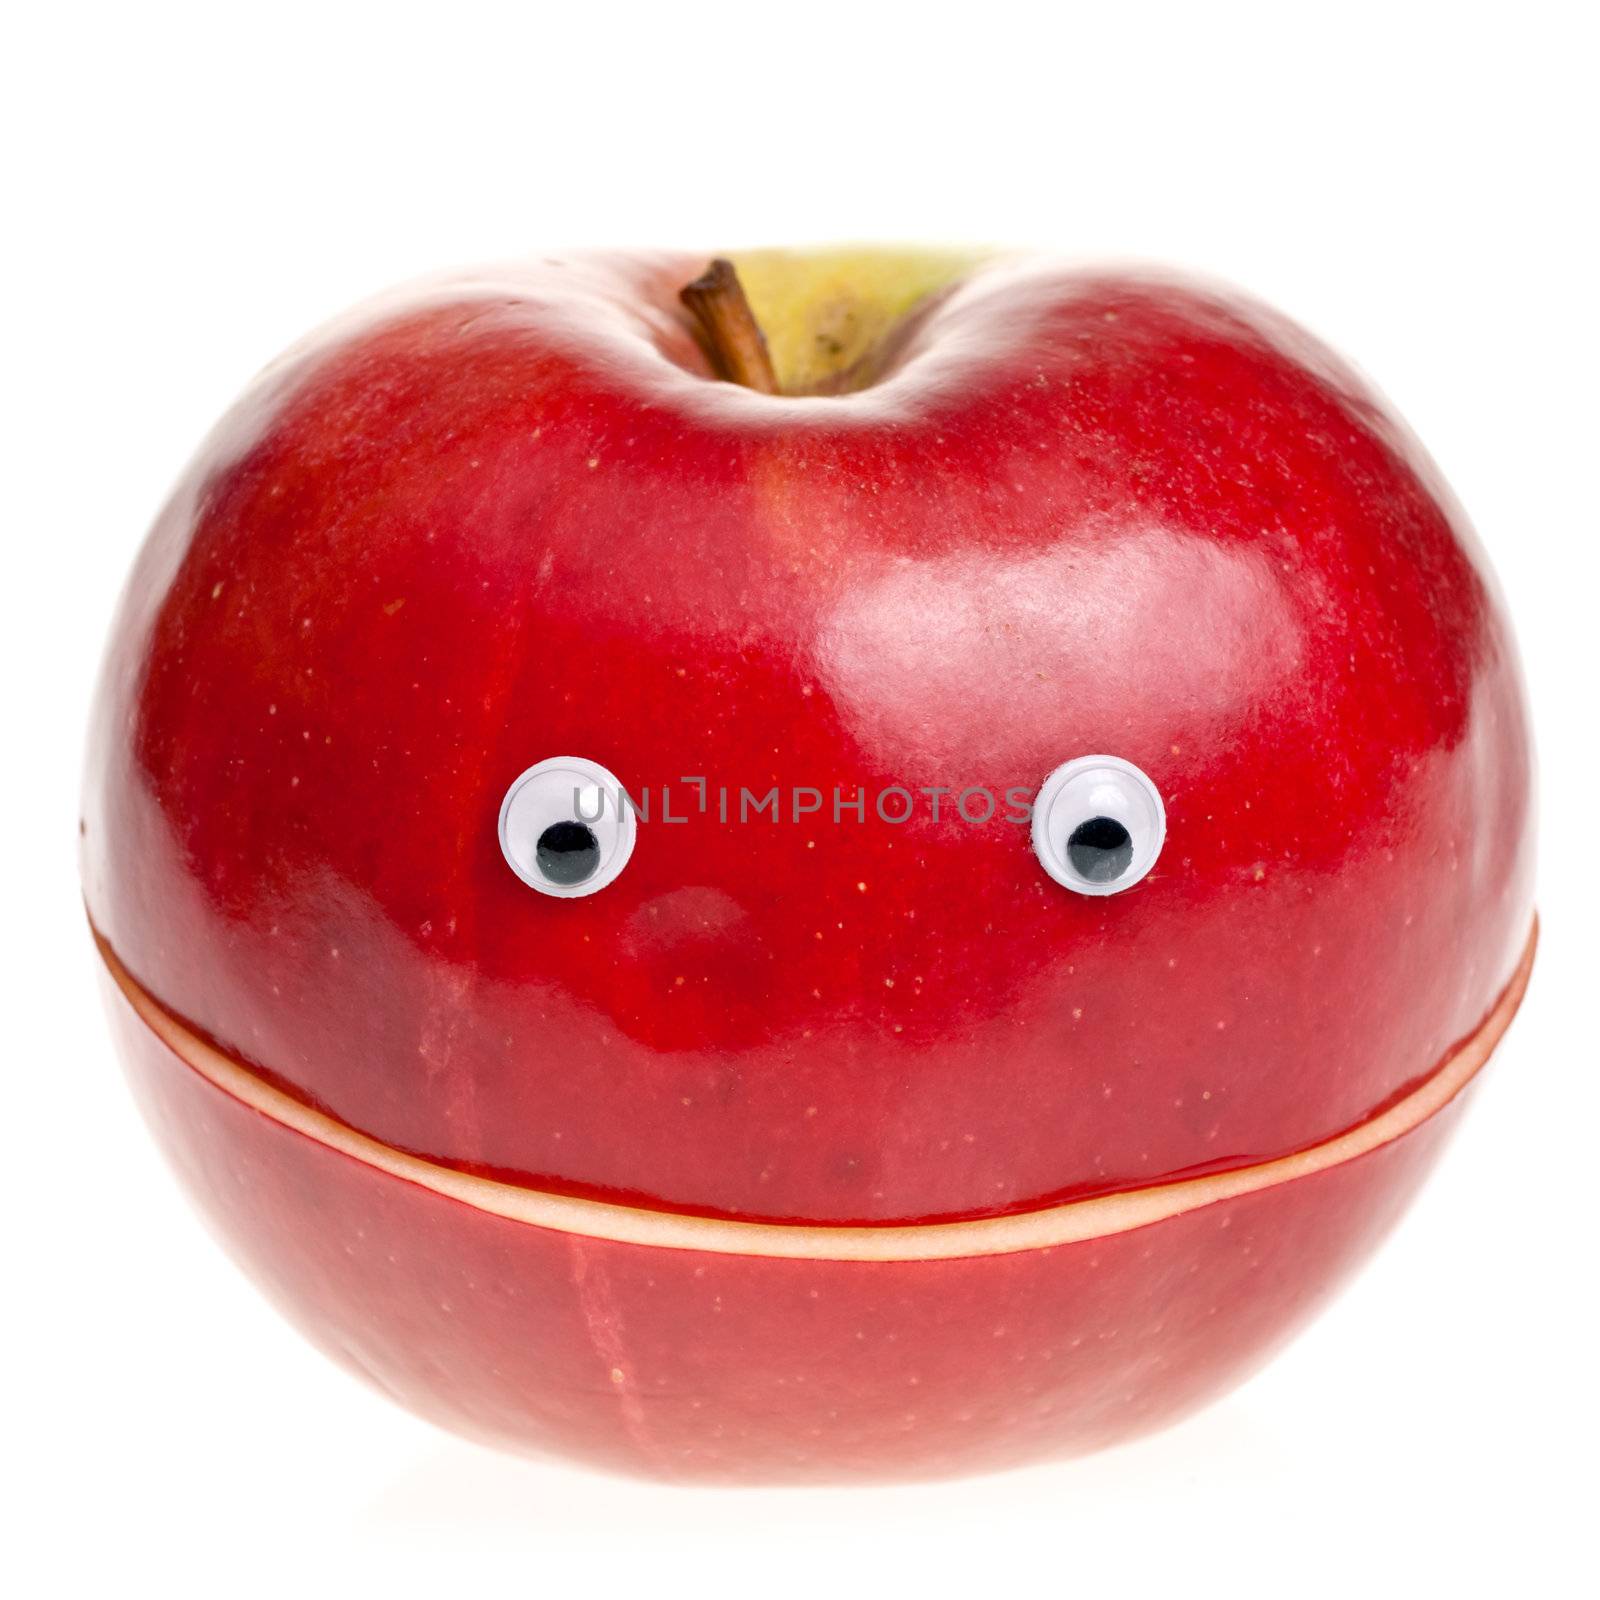 Funny fruit character Red Smiling Apple on white background